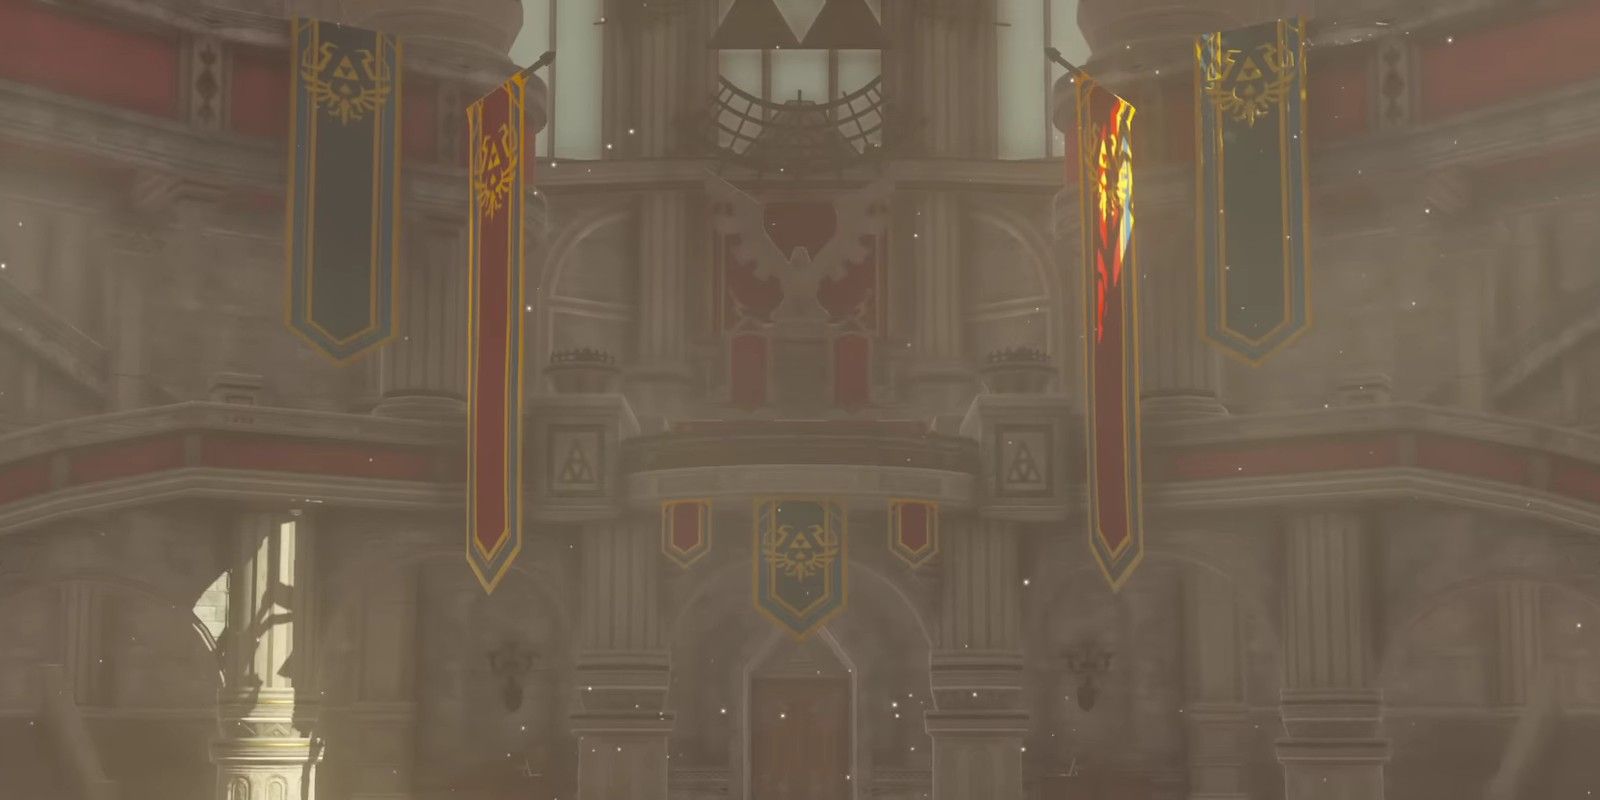 The apparently restored, empty Throne Room of Hyrule Castle, as seen in The Legend of Zelda: Tears of the Kingdom.